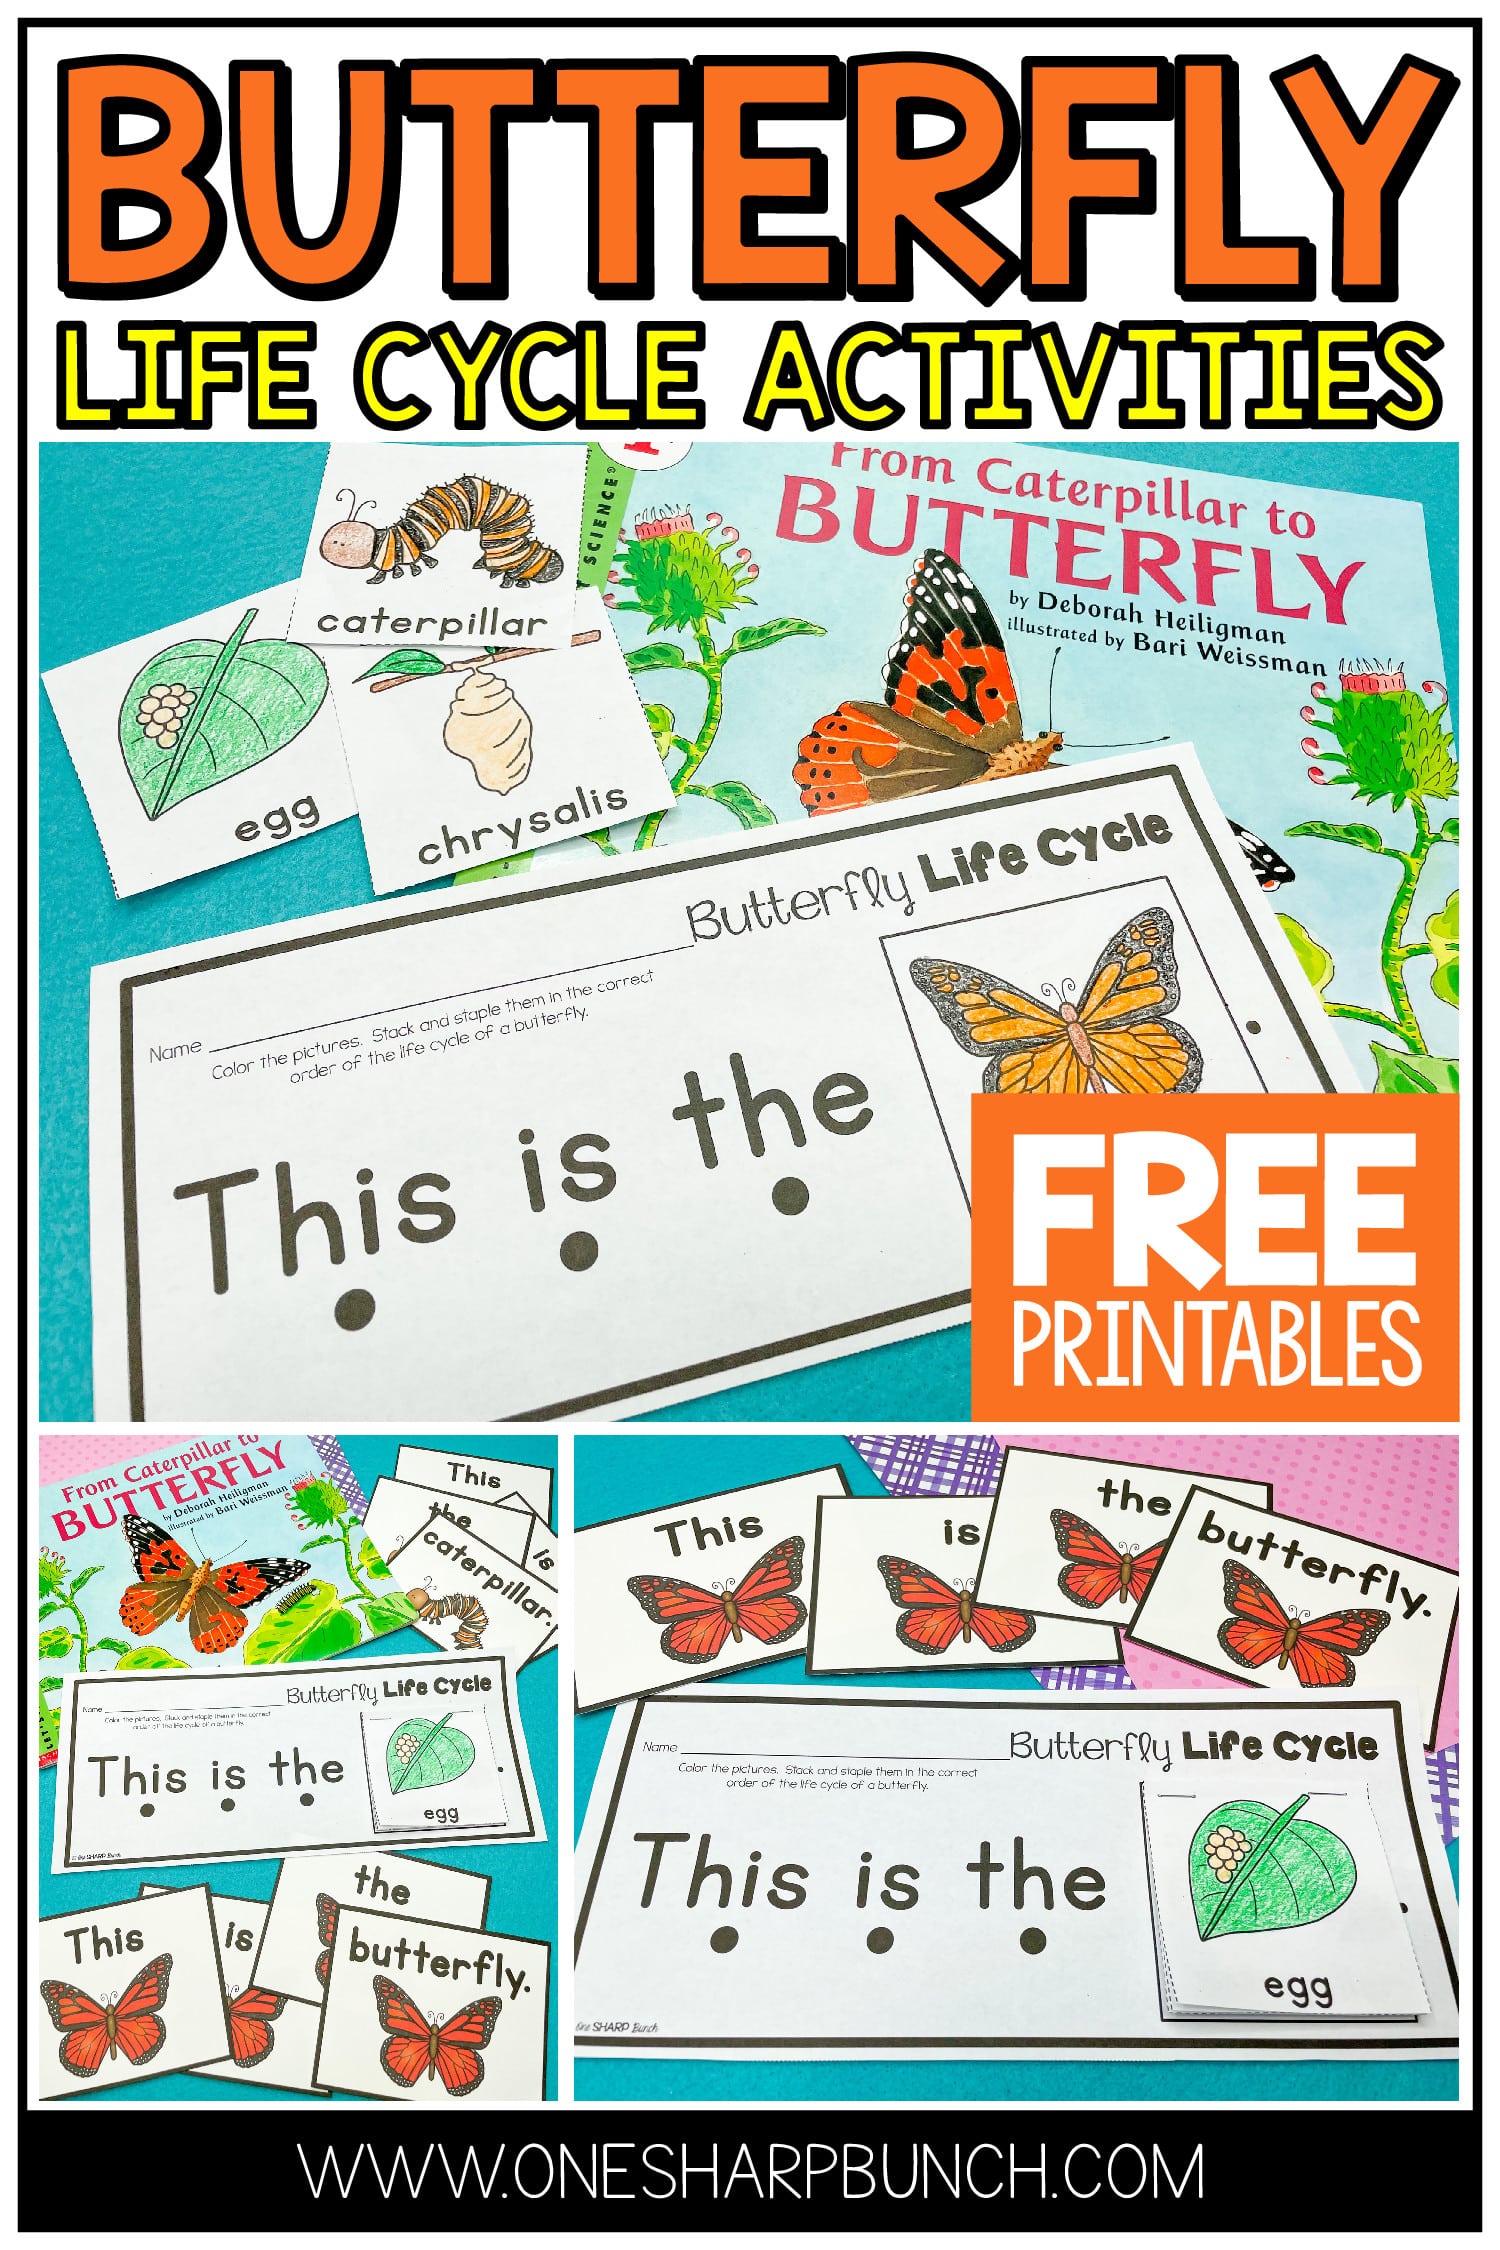 Teach your Preschool and Kindergarten students all about the life cycle of a butterfly with this butterfly life cycle poem, butterfly craft and FREE butterfly life cycle sequence strips! These interactive spring activities are the perfect way to explore how butterflies change and grow!